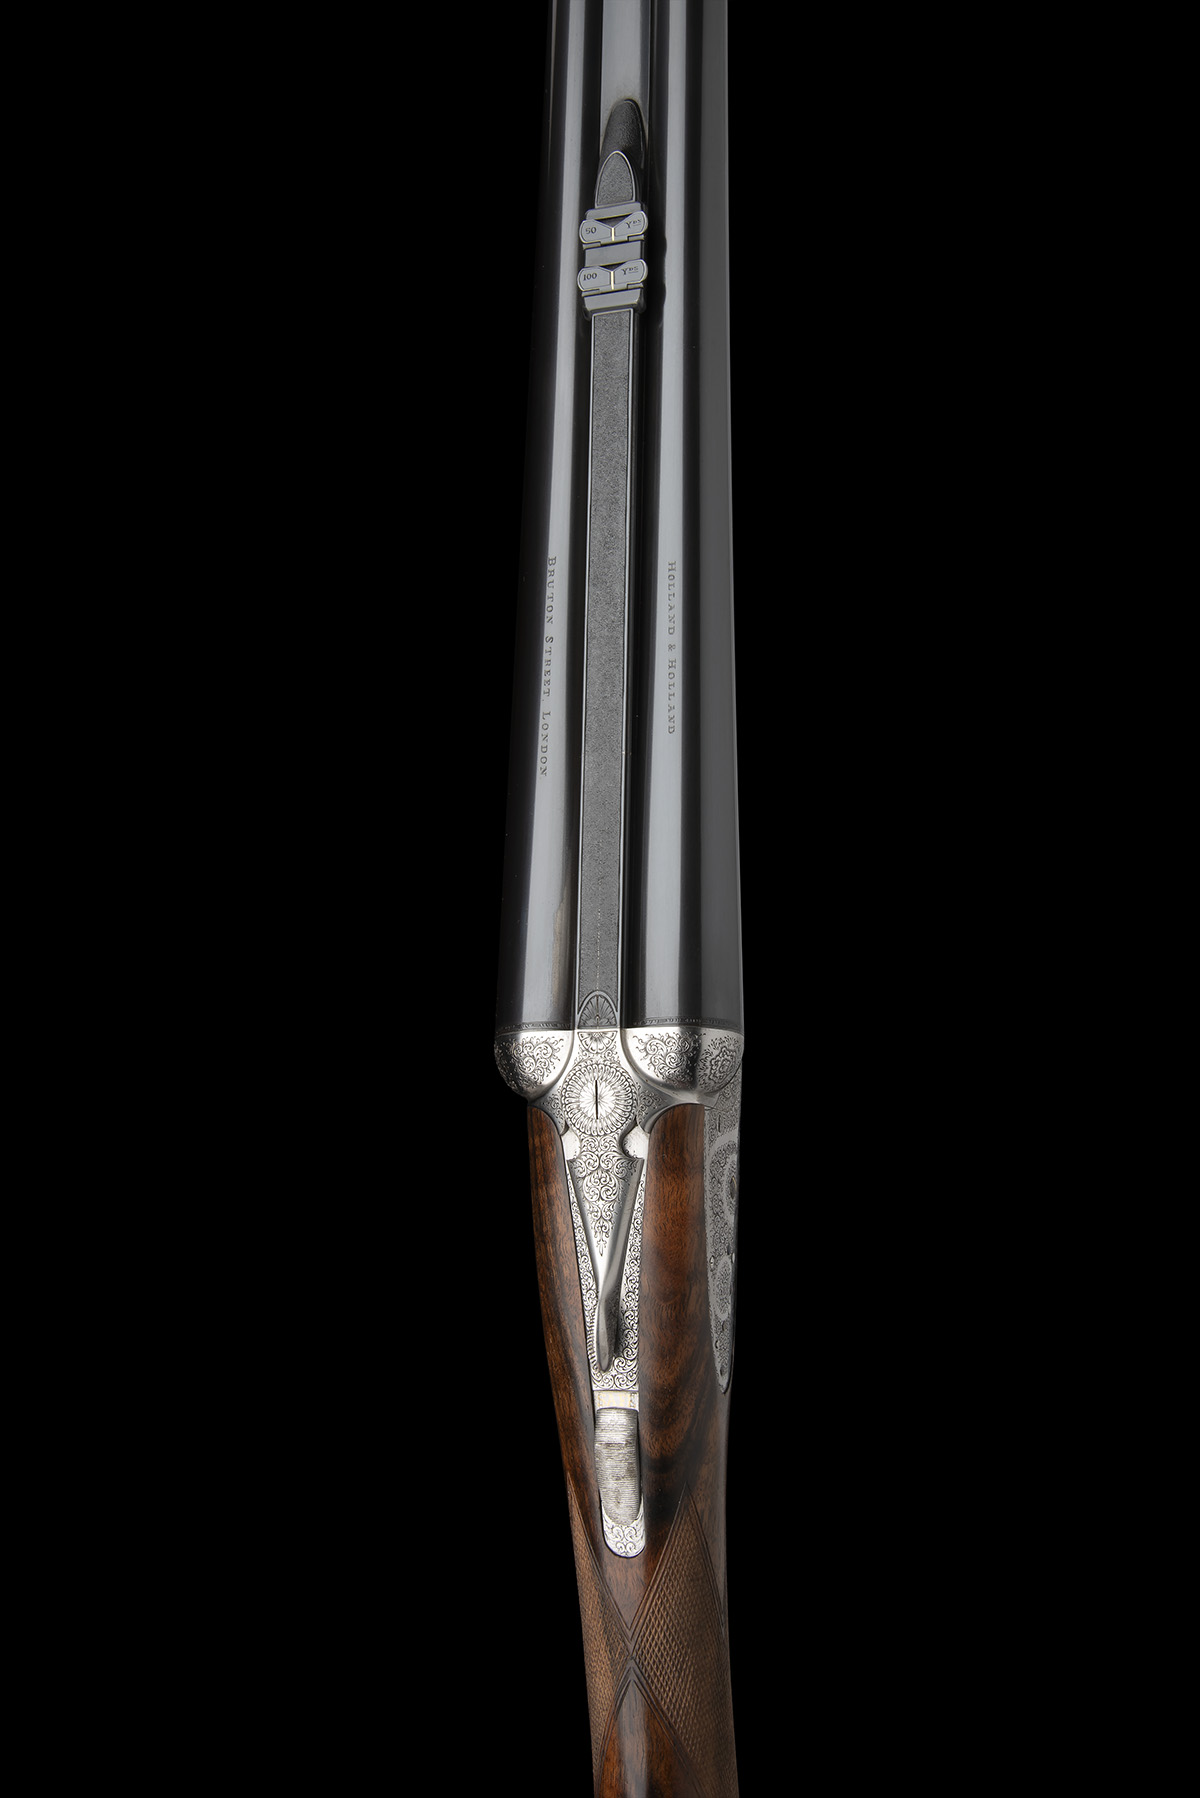 HOLLAND & HOLLAND A LITTLE USED 12-BORE 'THE PARADOX' ROUND-BODIED BACK-ACTION SIDELOCK EJECTOR SHOT - Image 2 of 4